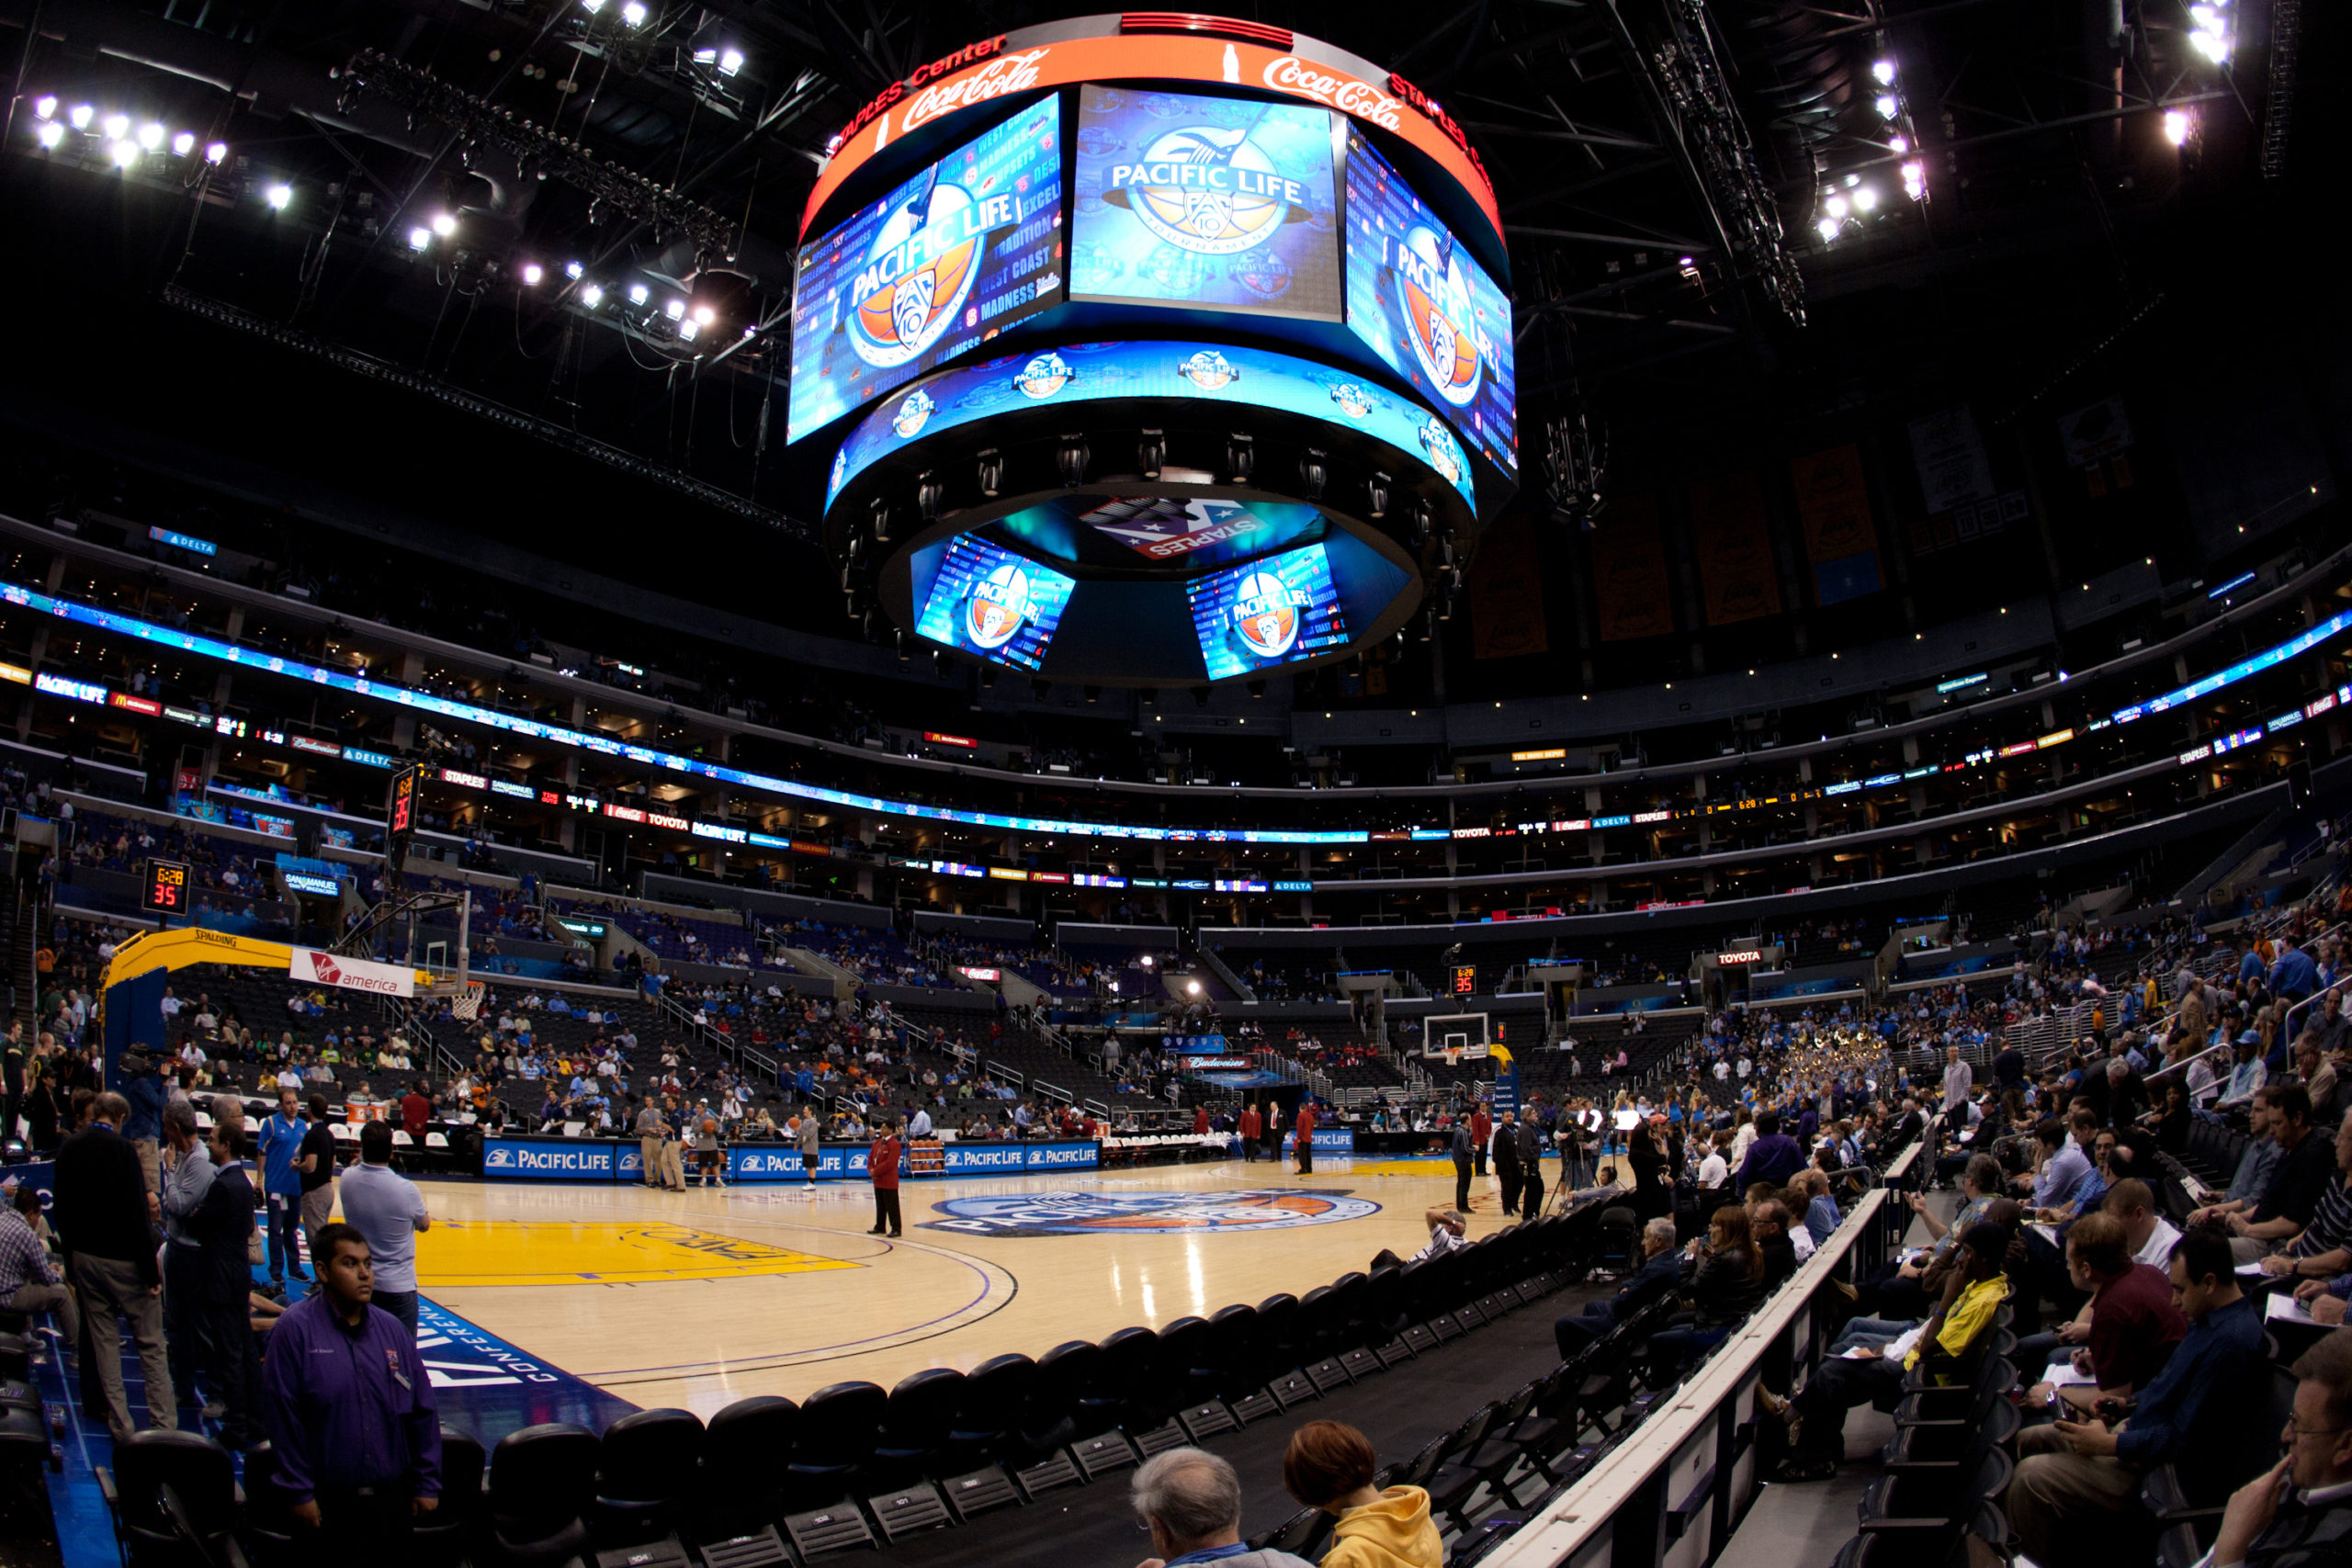 The 10 Loudest Stadiums In The NBA